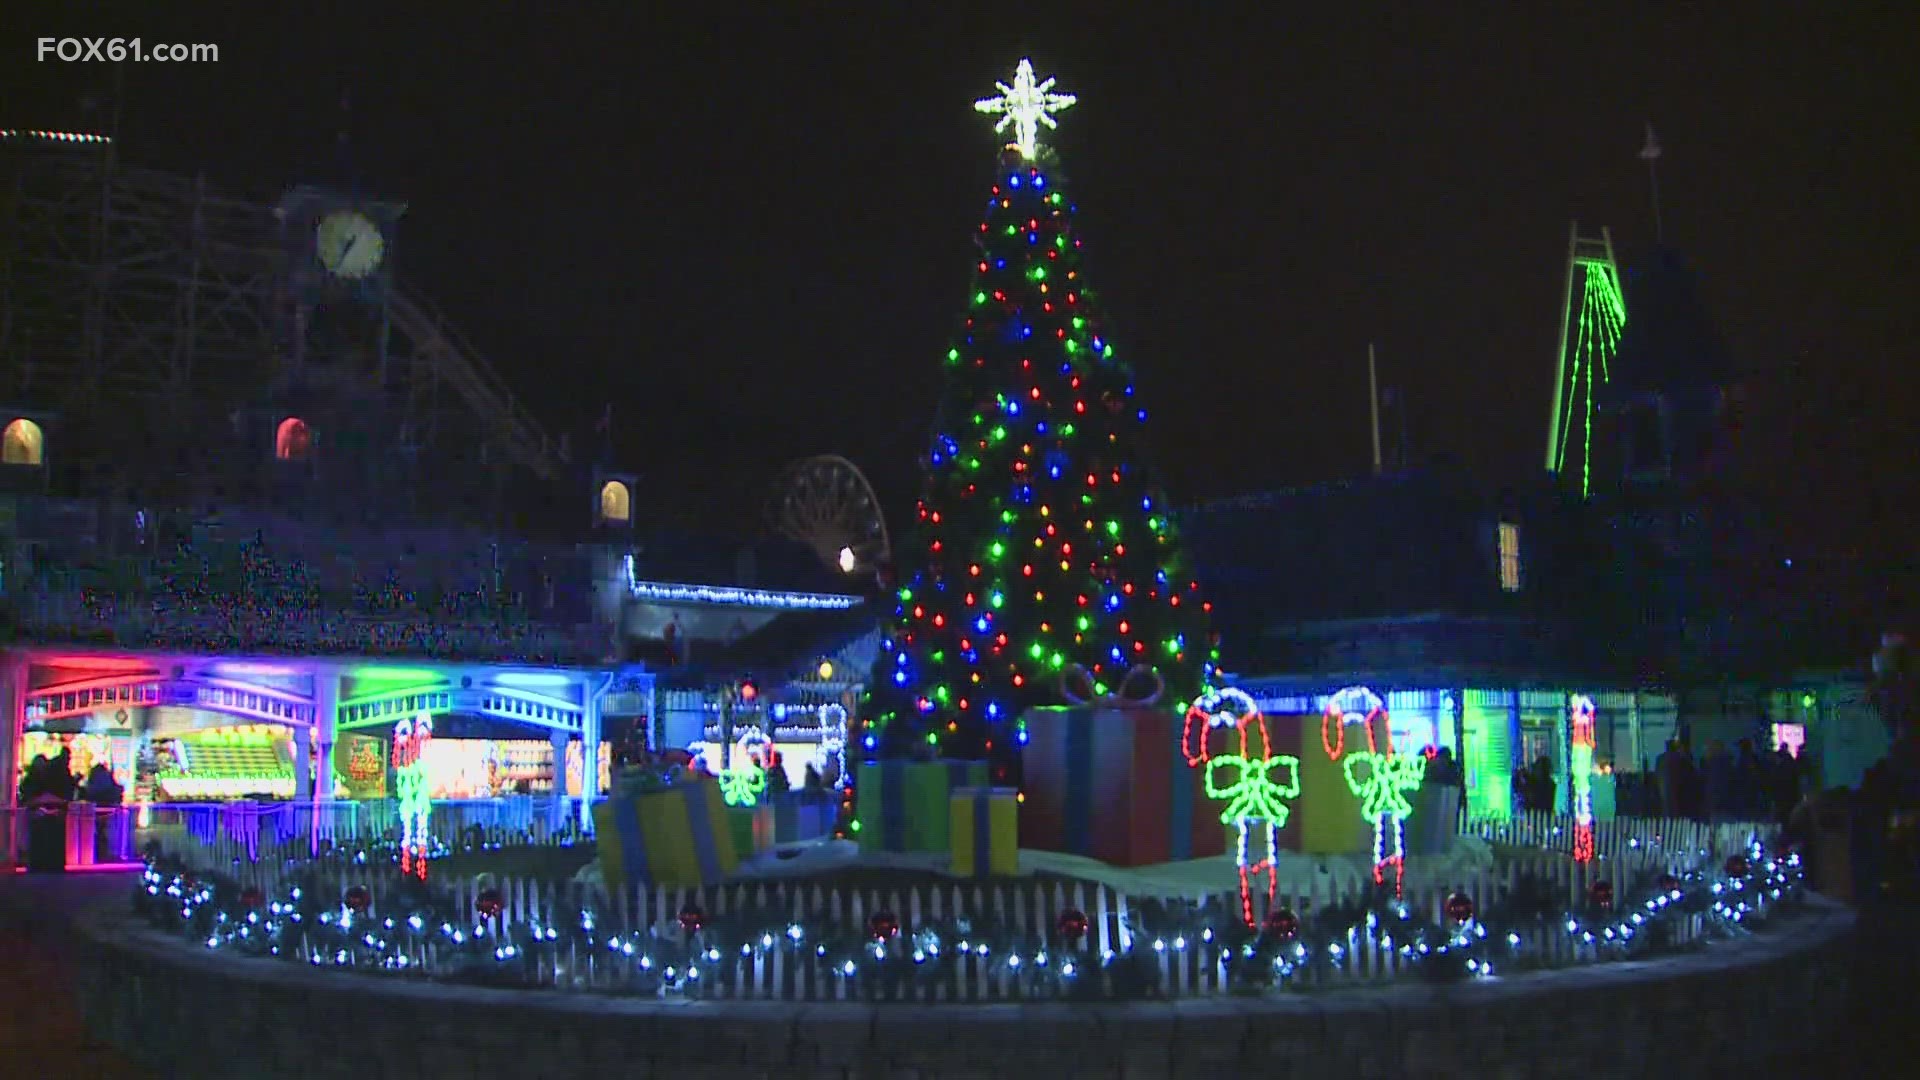 This year marks the 11th year that the park will be lit up to celebrate the holiday season.